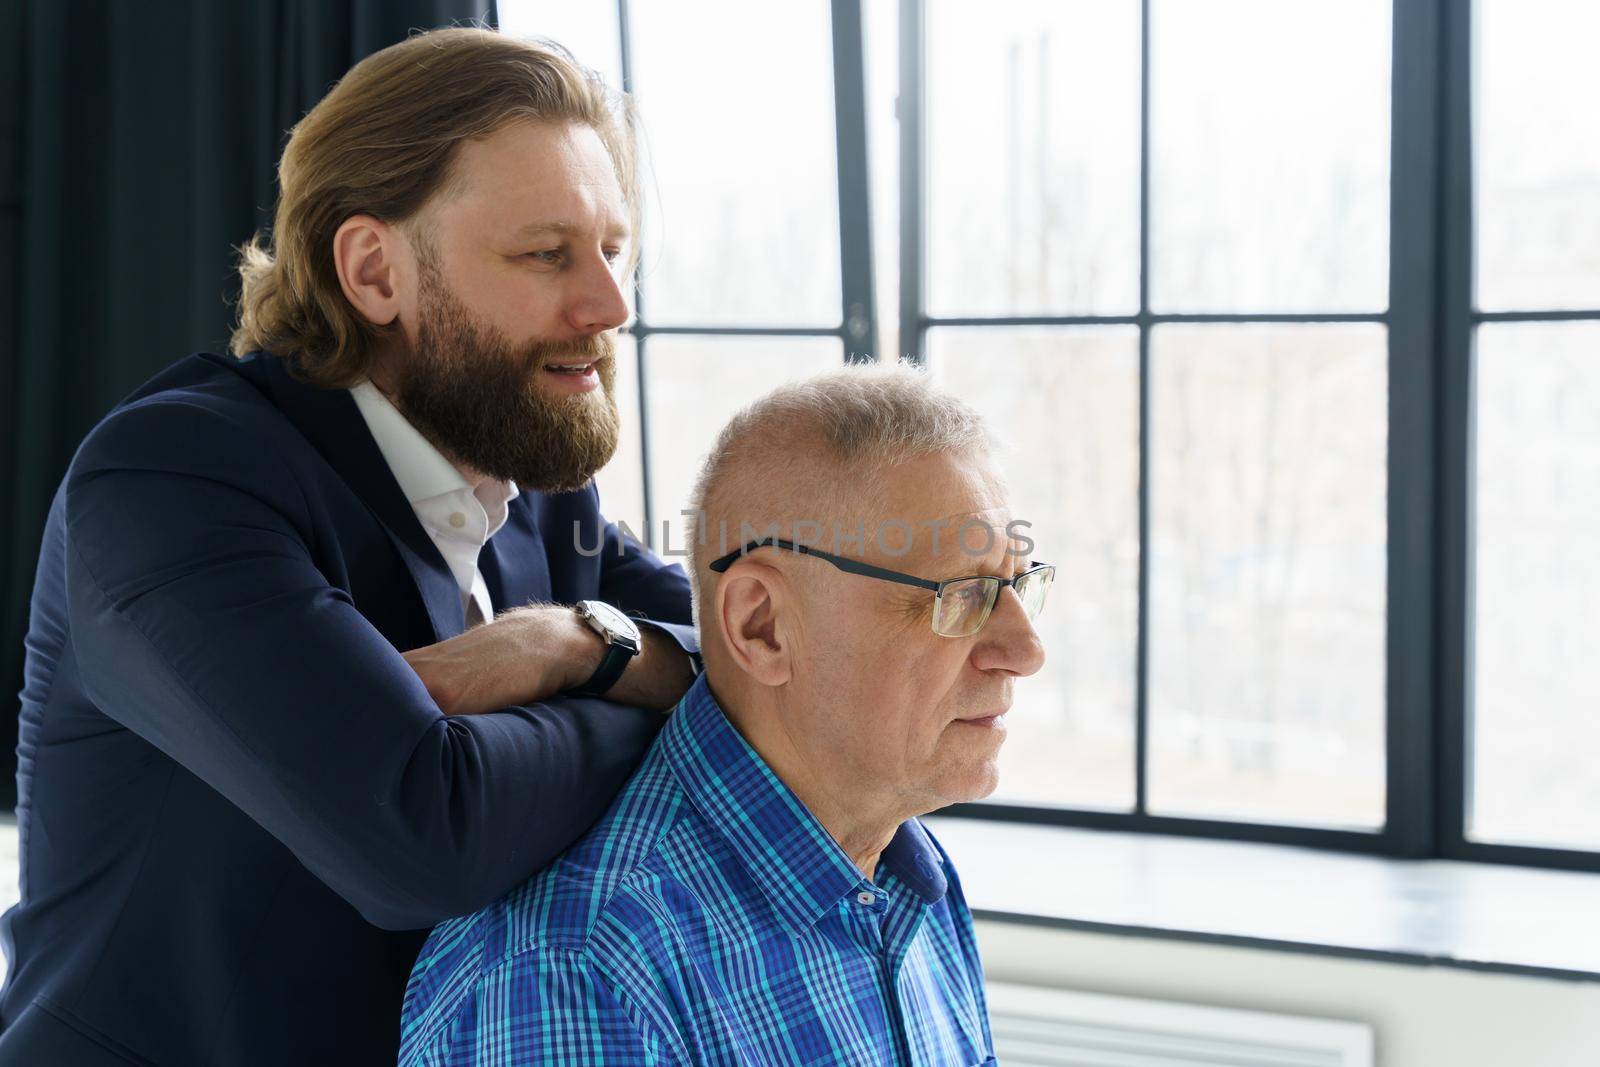 the son in a stylish suit leans on the shoulders of his father, Father and son in huge window background, both men look into the camera, an elderly man in glasses, young man with a beard and long hair. High quality photo